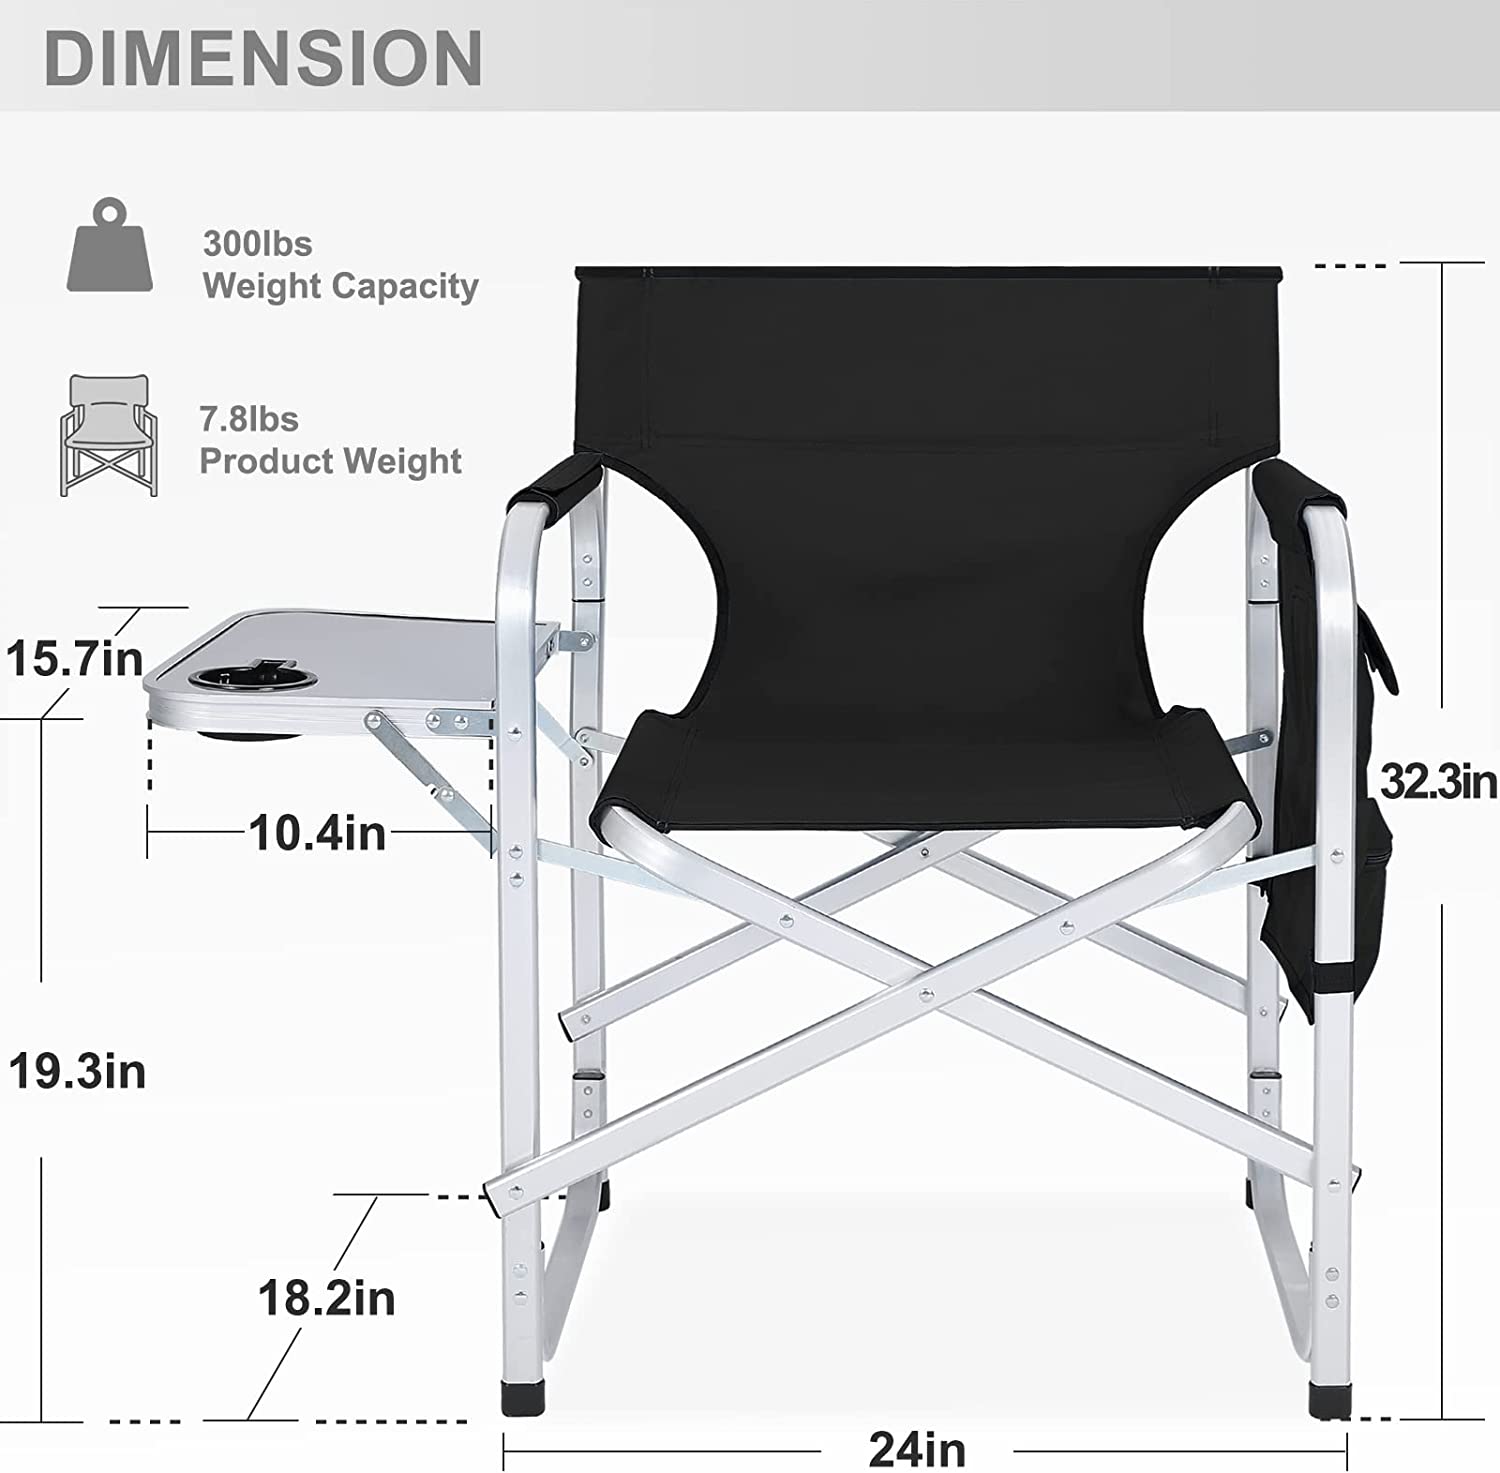 Camping Chair Heavy Duty, Folding Directors Chair, Low Rocking Chair Outdoor, Padded Set with Table Attached, Oversized - image 3 of 11